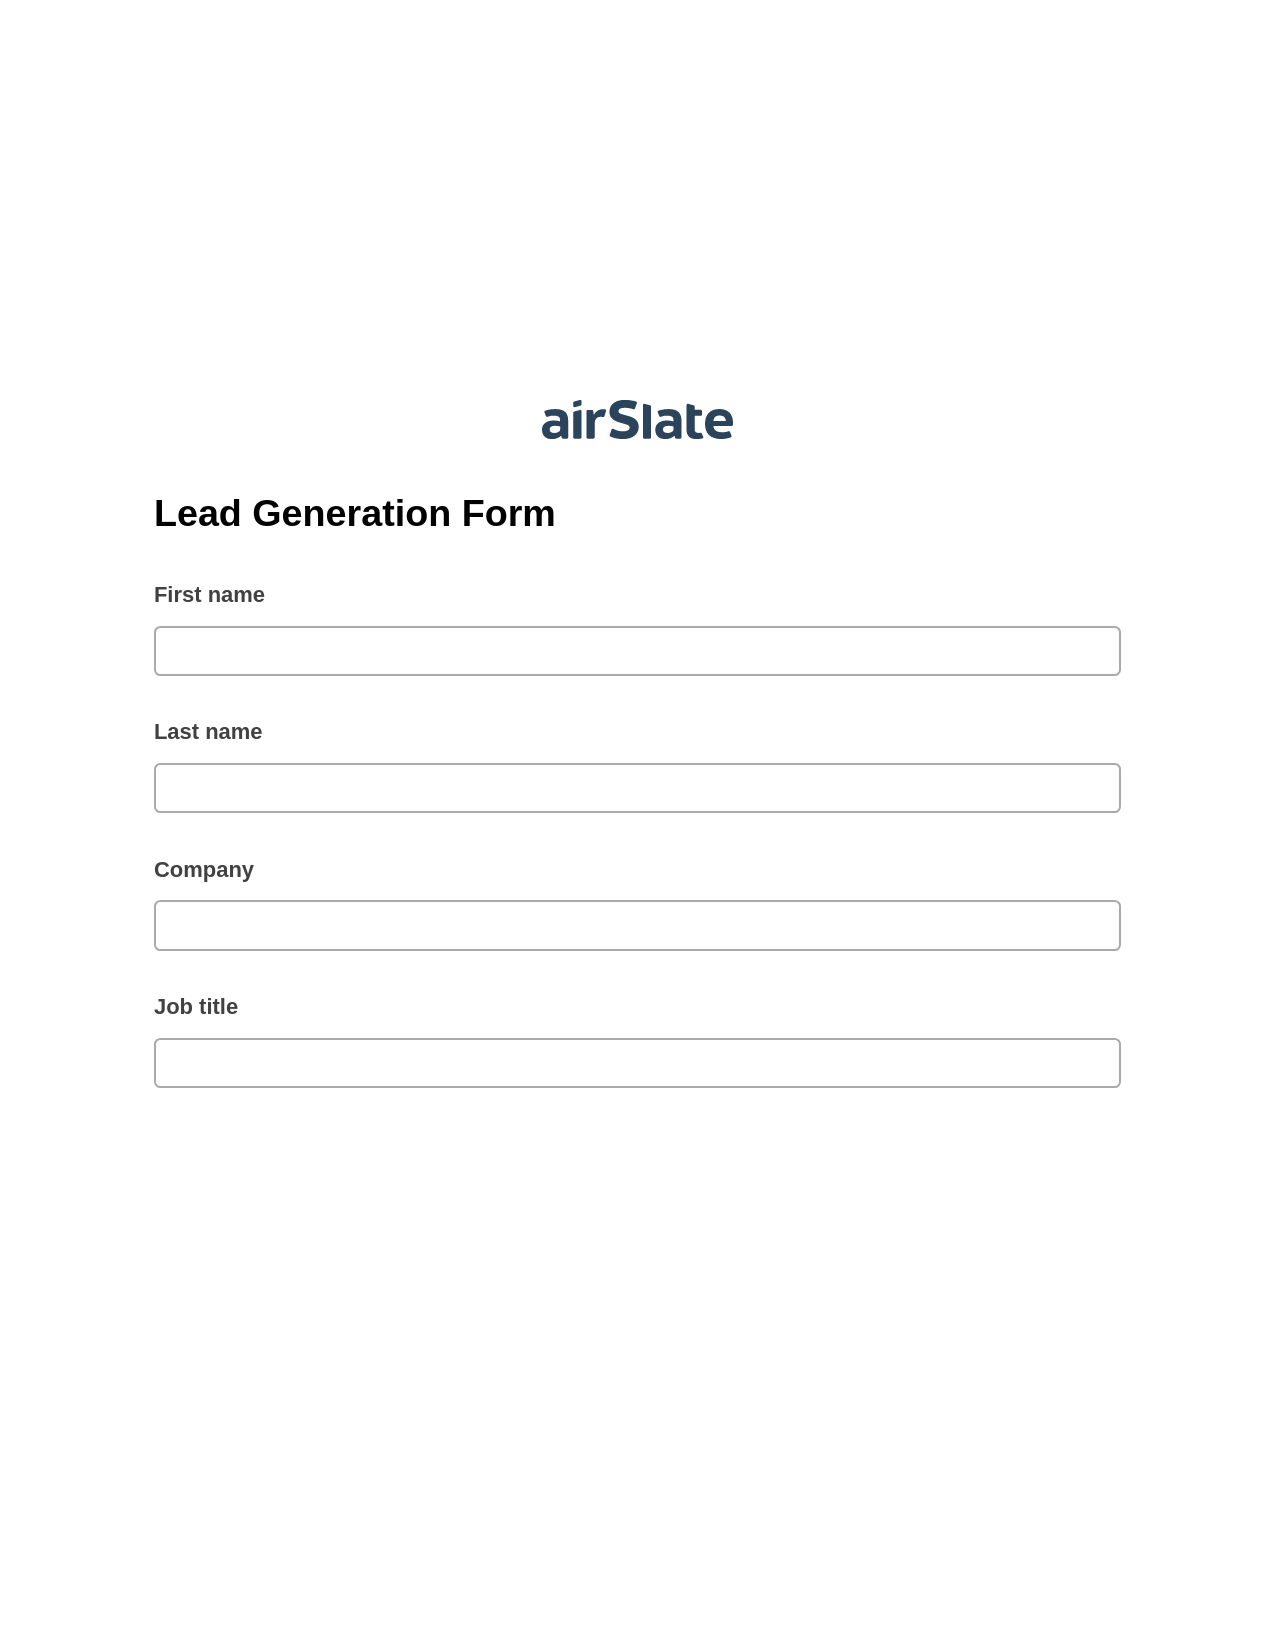 Lead Generation Form Pre-fill from Salesforce Records Bot, Send a Slate with Roles Bot, Export to Google Sheet Bot